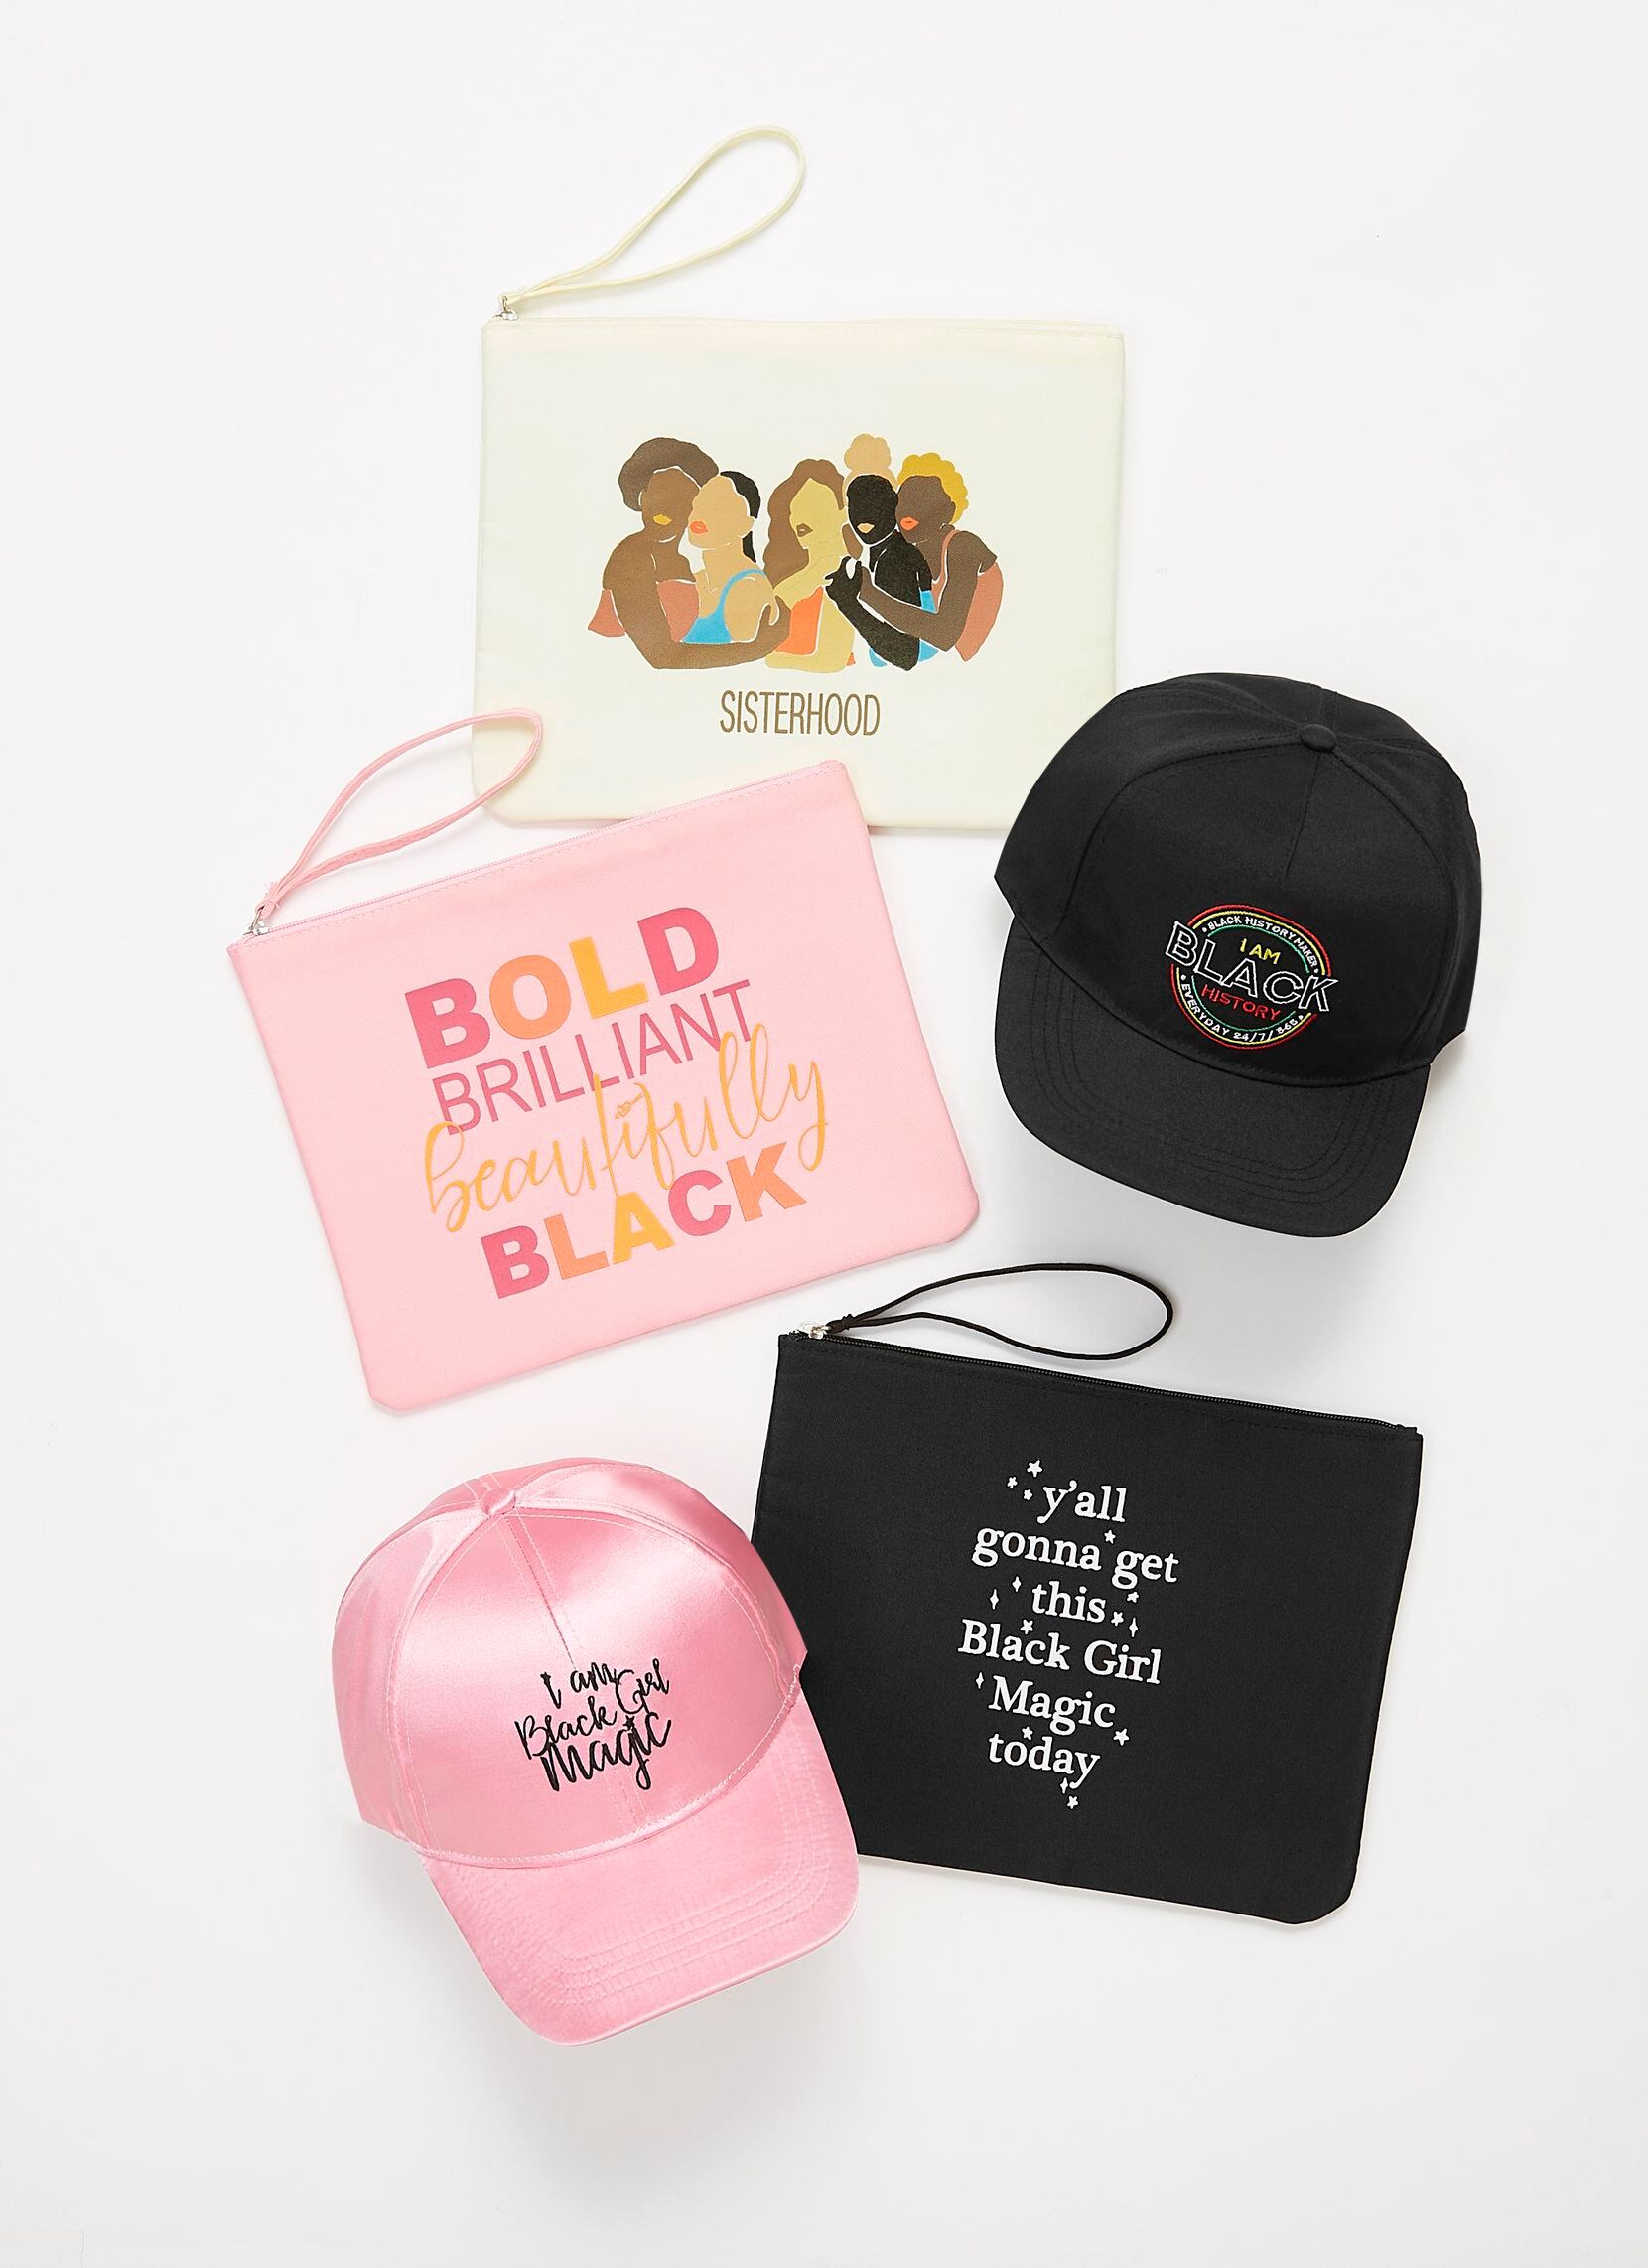 Fashion accessories for Black History Month from J.C. Penney's new Hope & Wonder private...